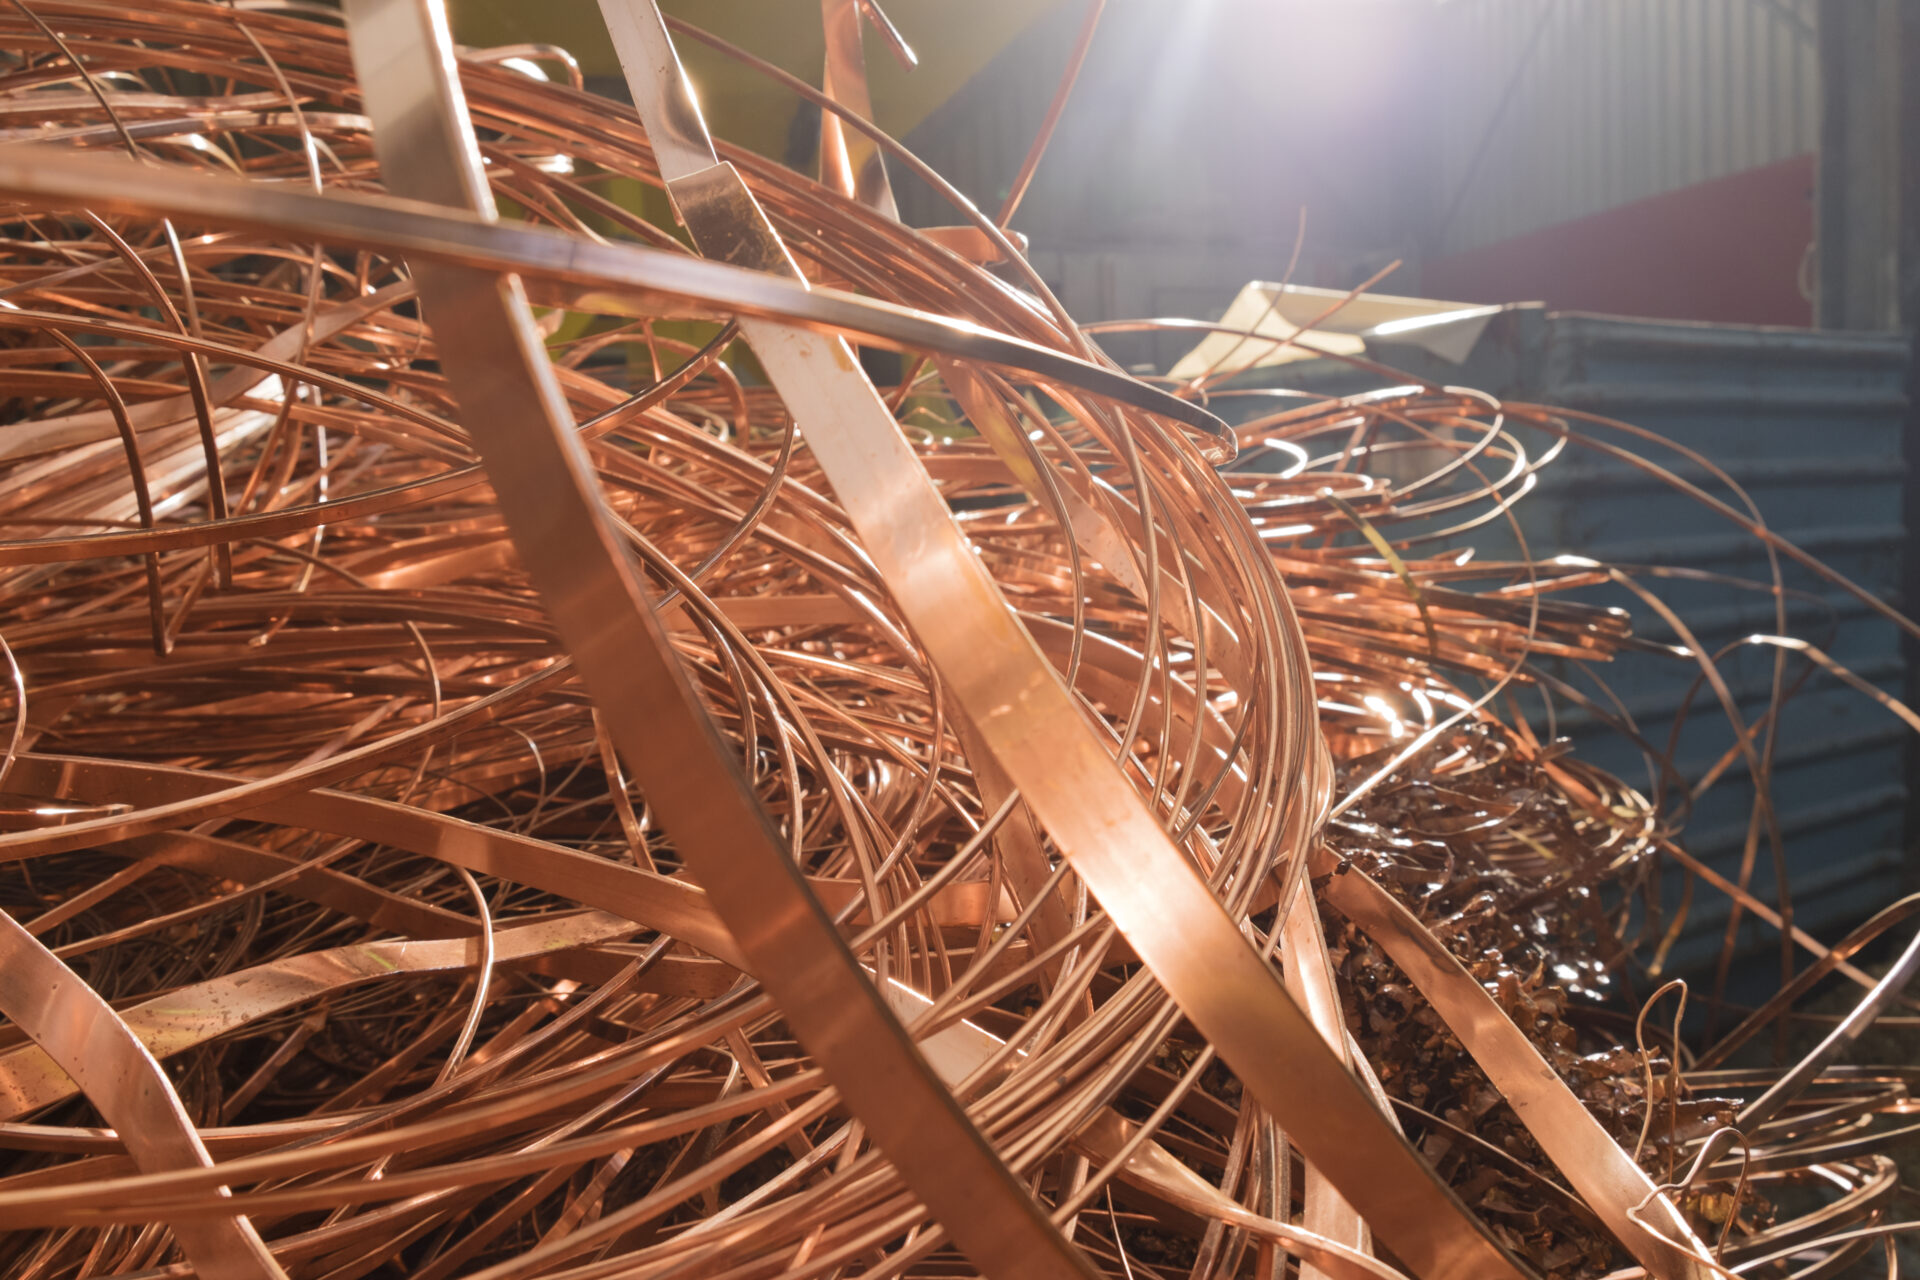 Copper wire scrap piled on top of itself